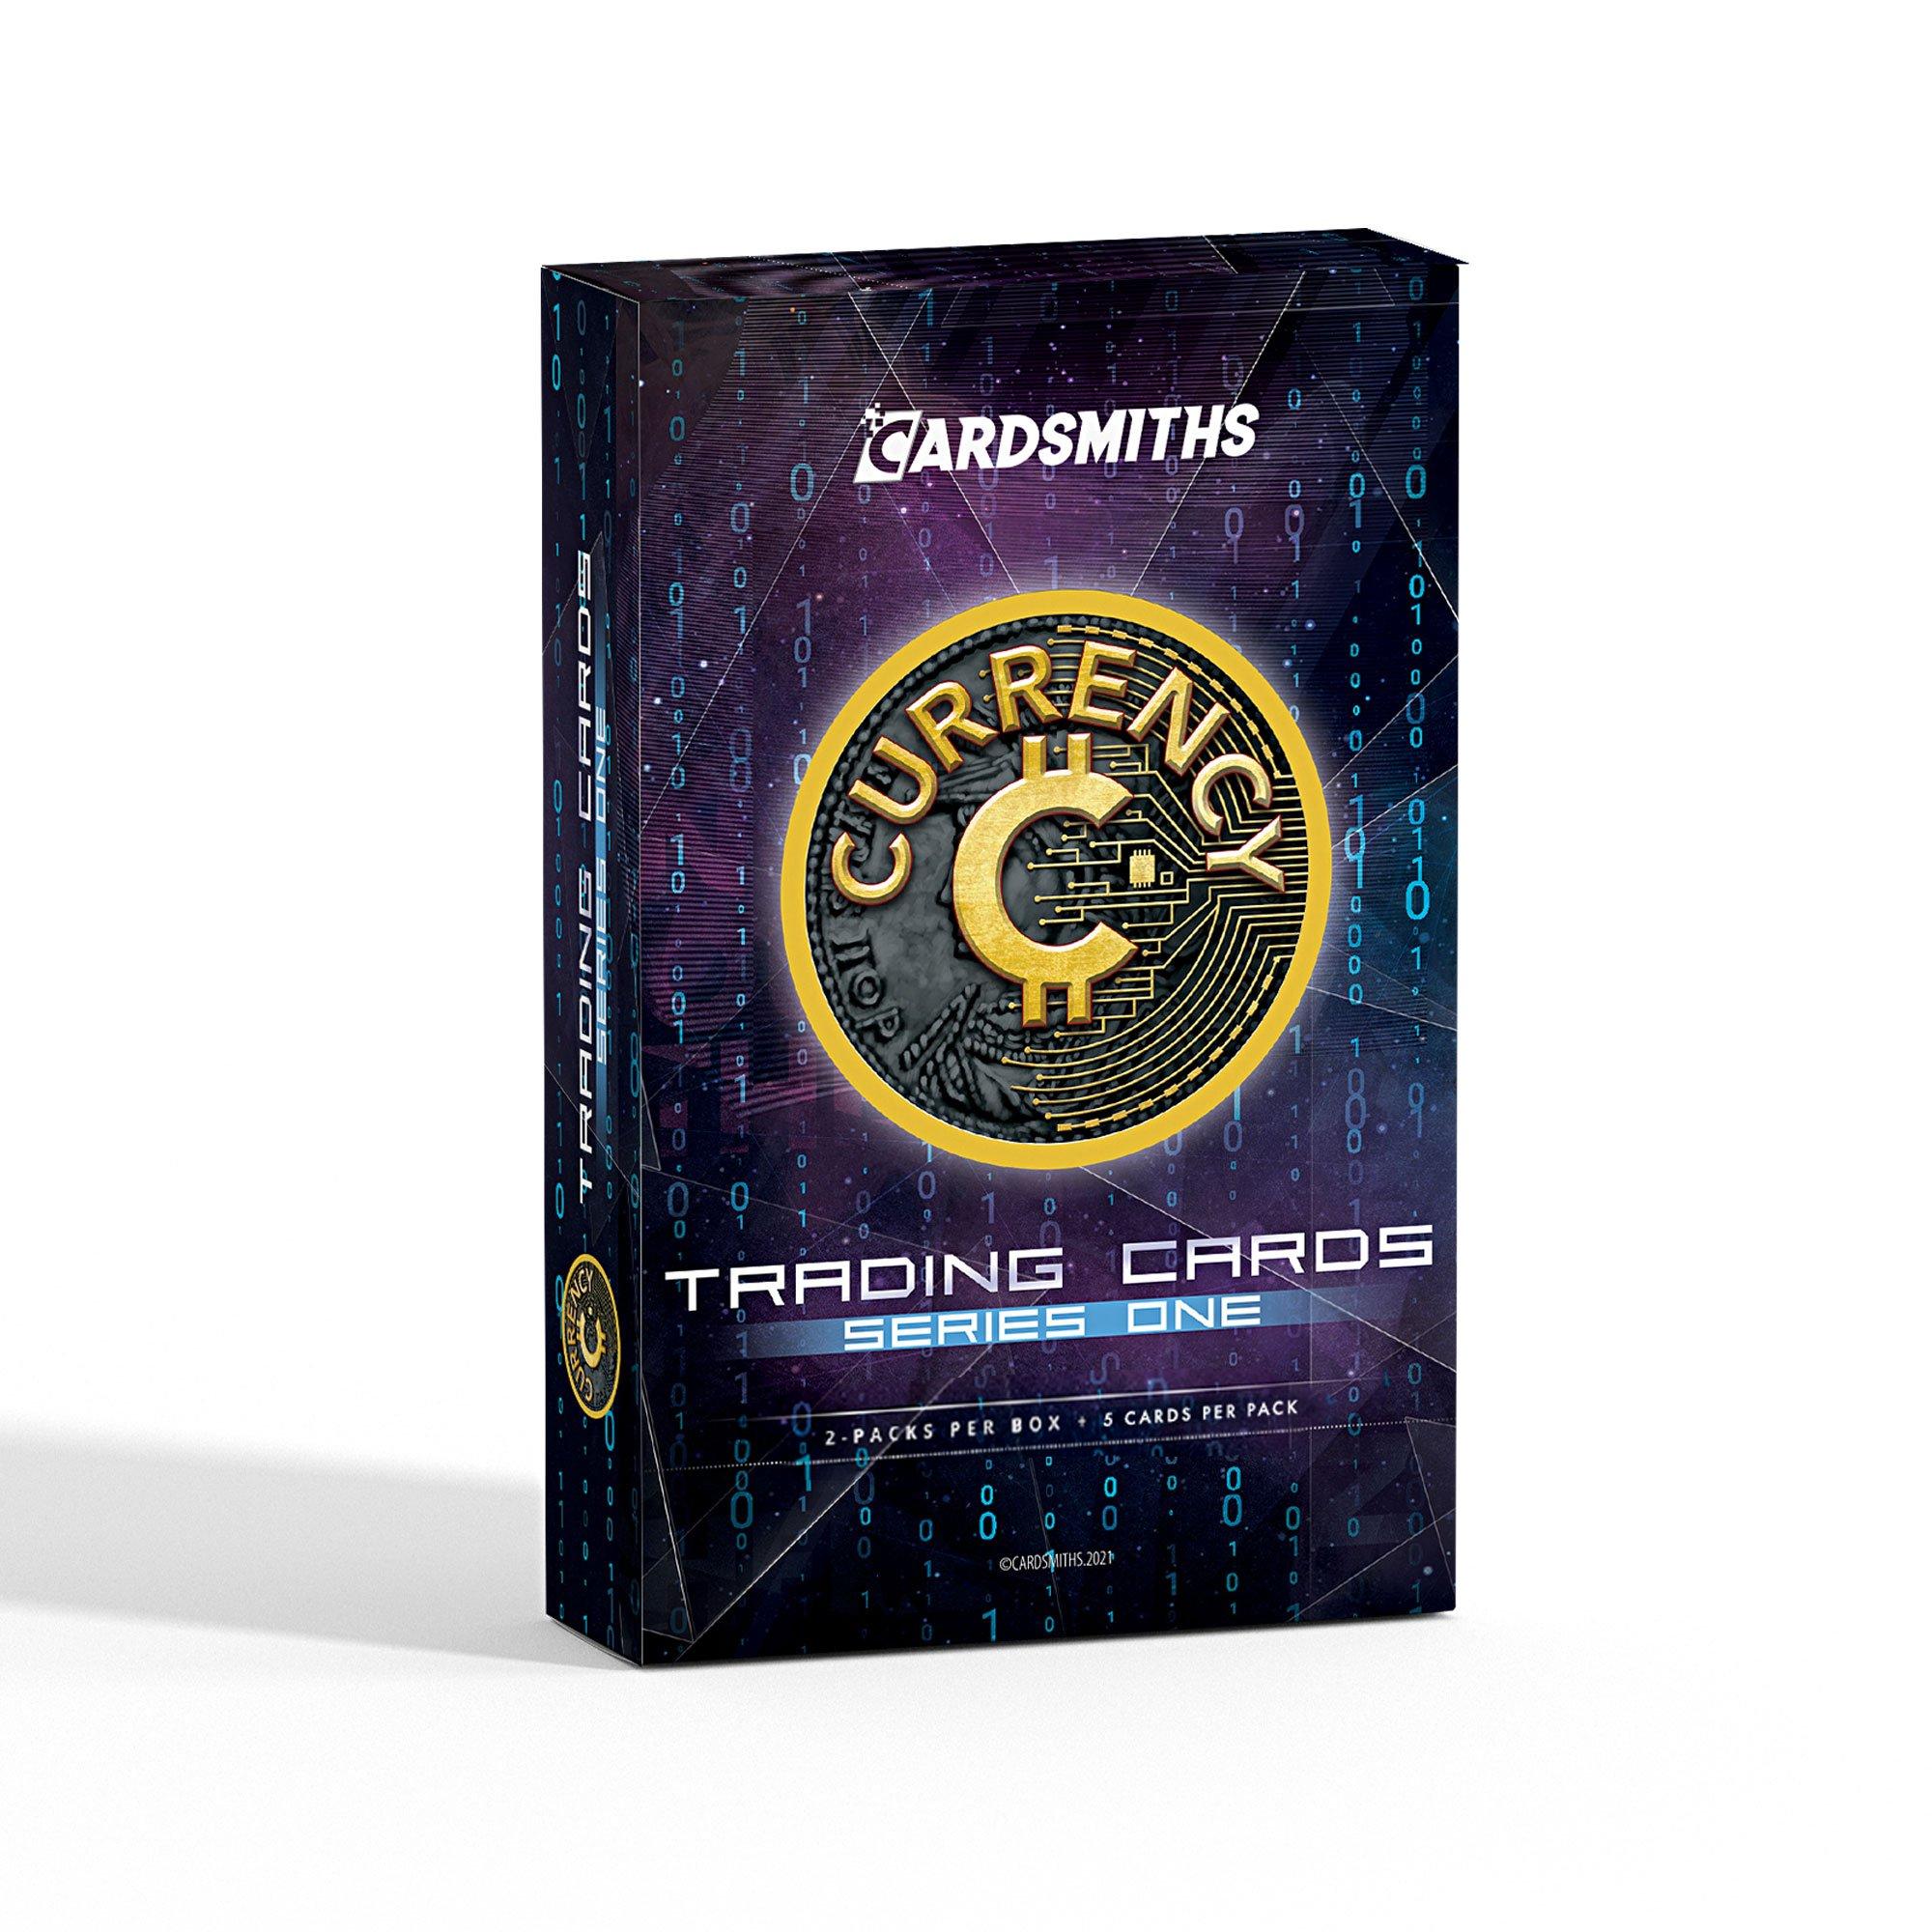 Cardsmiths Currency Series 1 Trading Cards 2-Pack Collector's Box